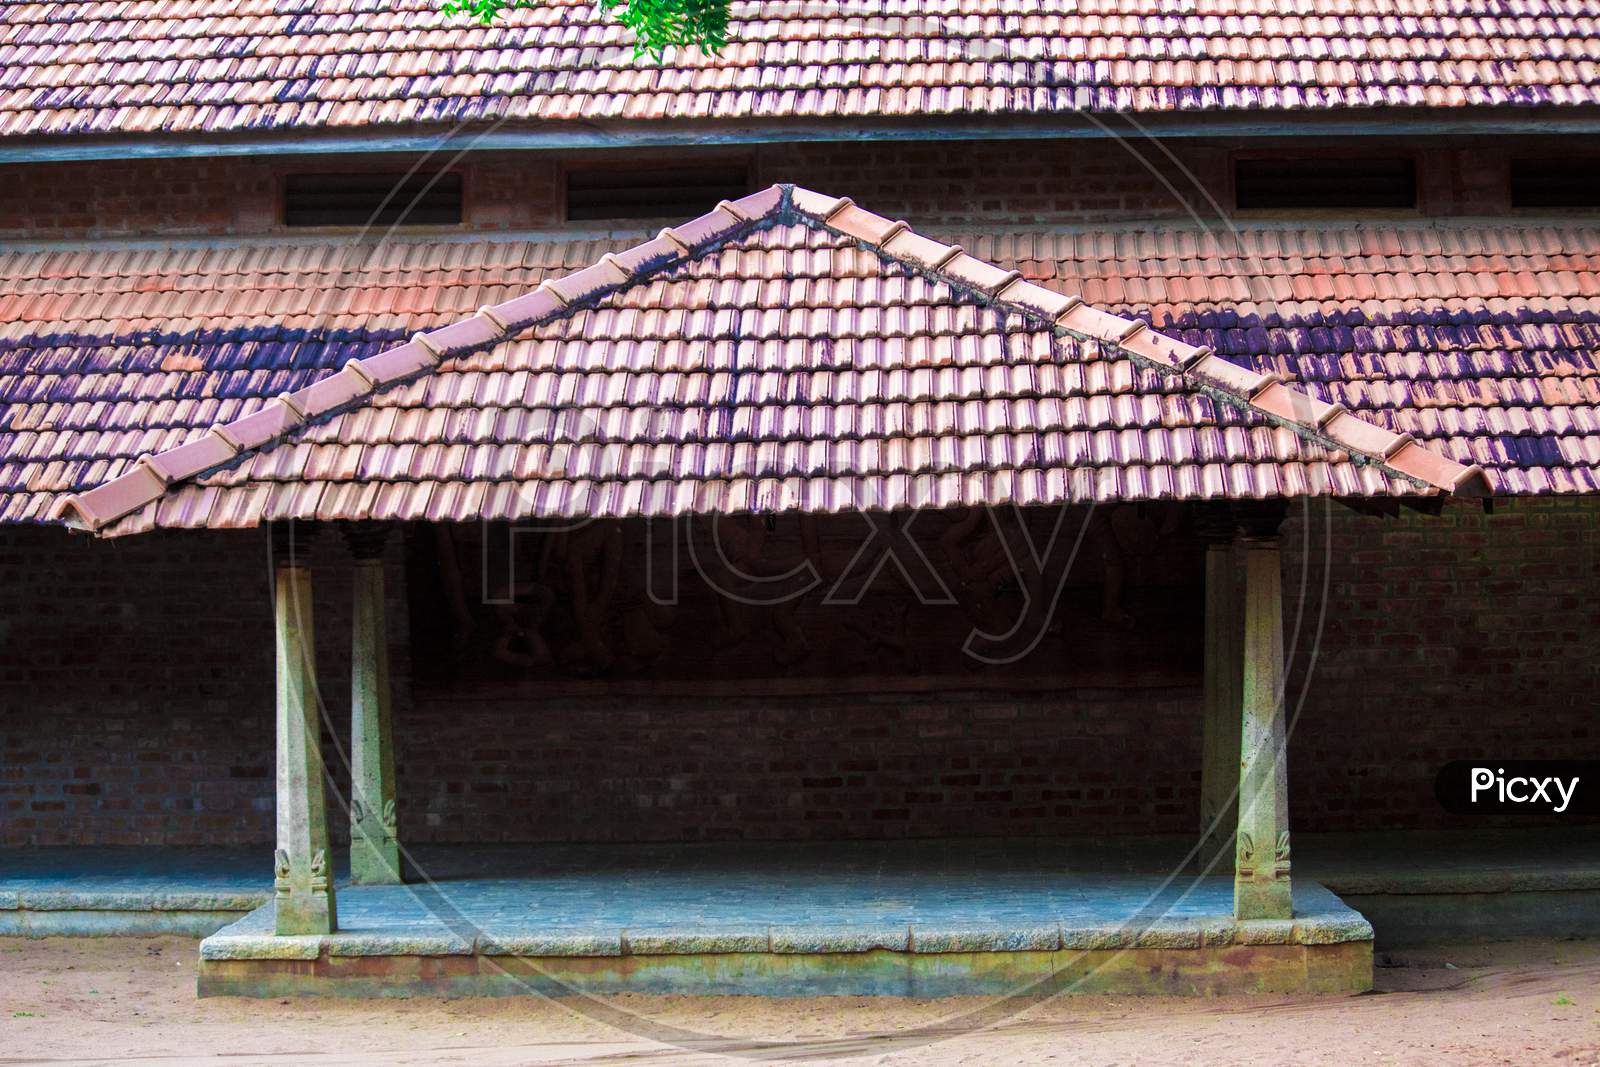 Old Tile Roofed Huts in Indian Villages